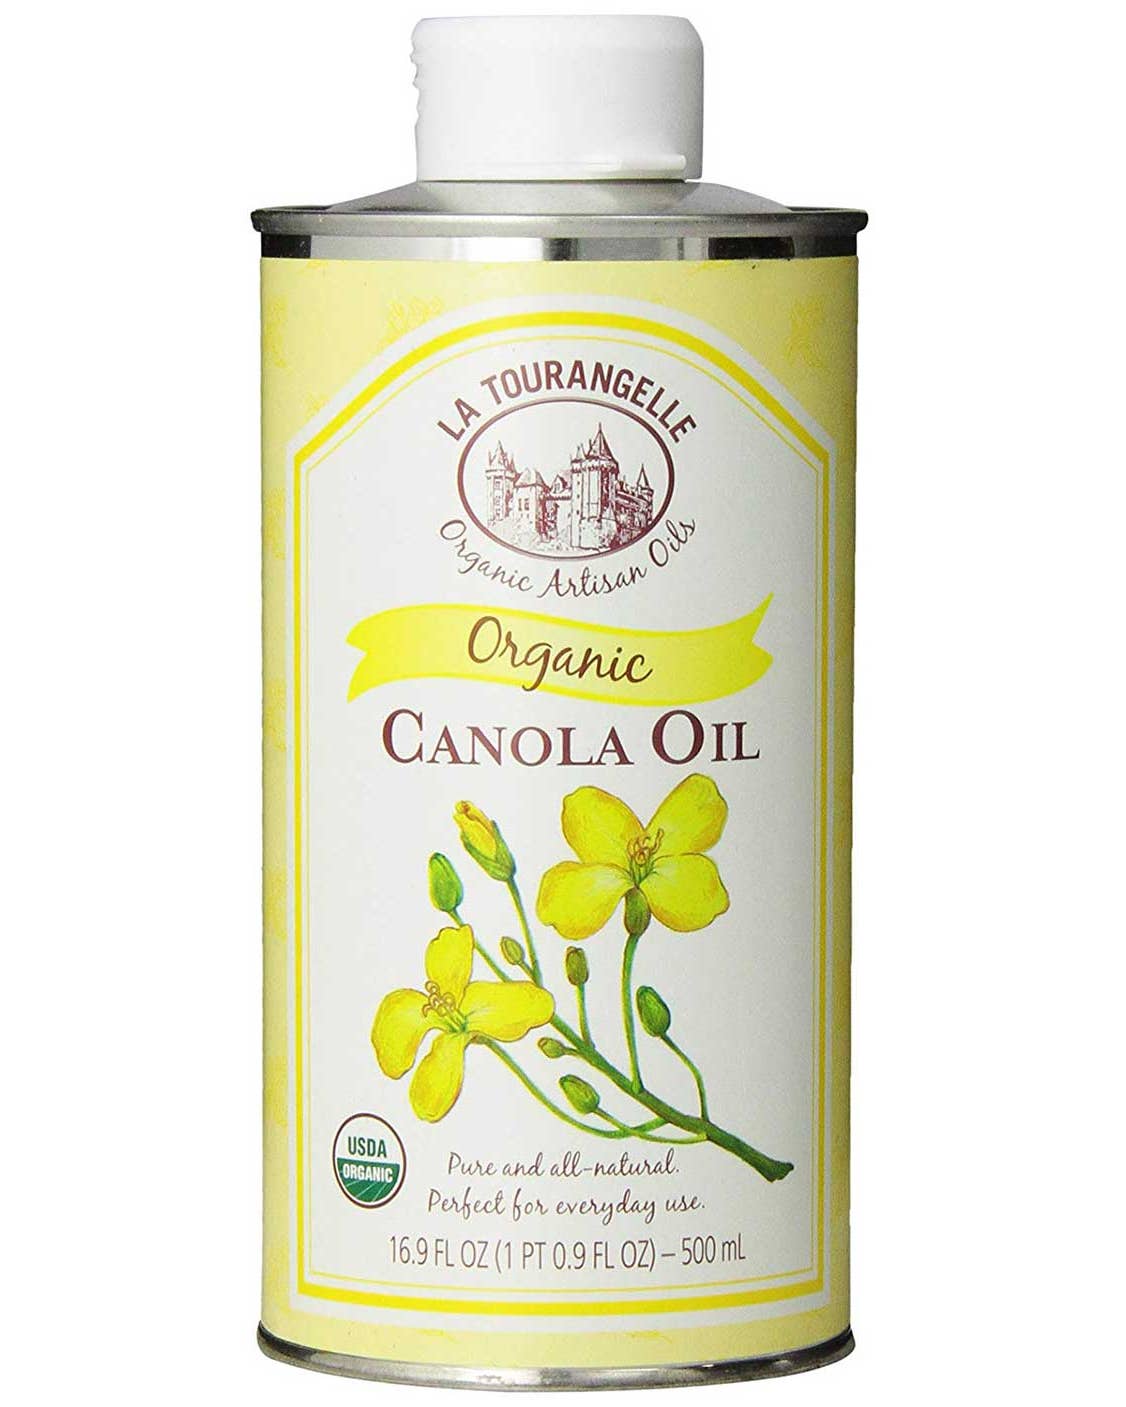 La Tourangelle Organic Canola Oil 16.9 Fl. Oz, All-Natural, Artisanal, Great for Cooking and Baking or as Base for Marinade 